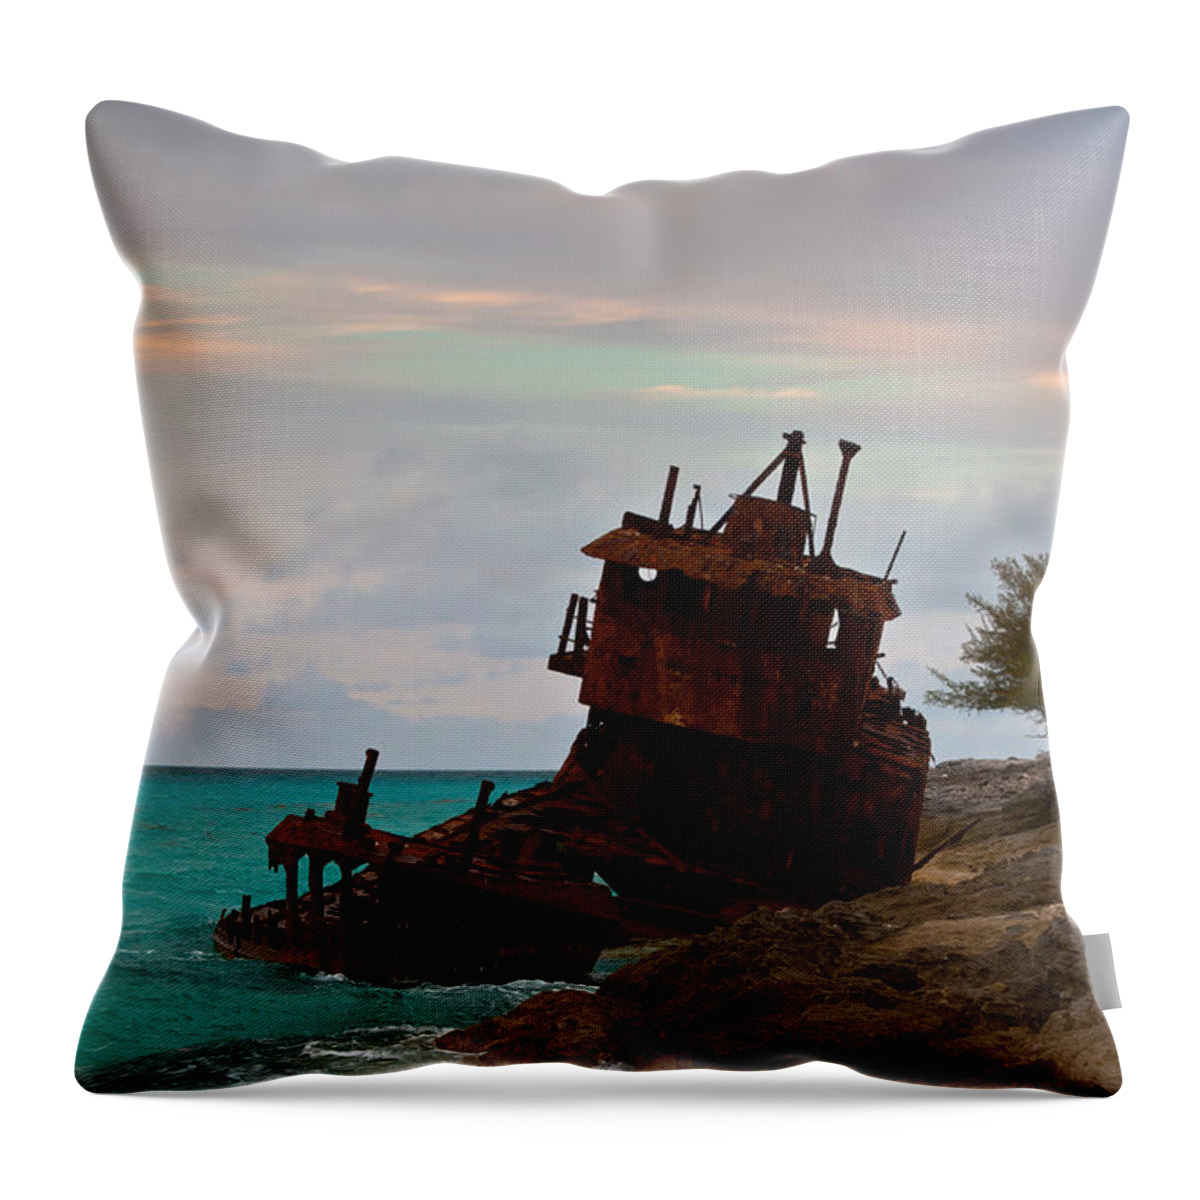 Aquamarine Throw Pillow featuring the photograph Gallant Lady Aground by Ed Gleichman